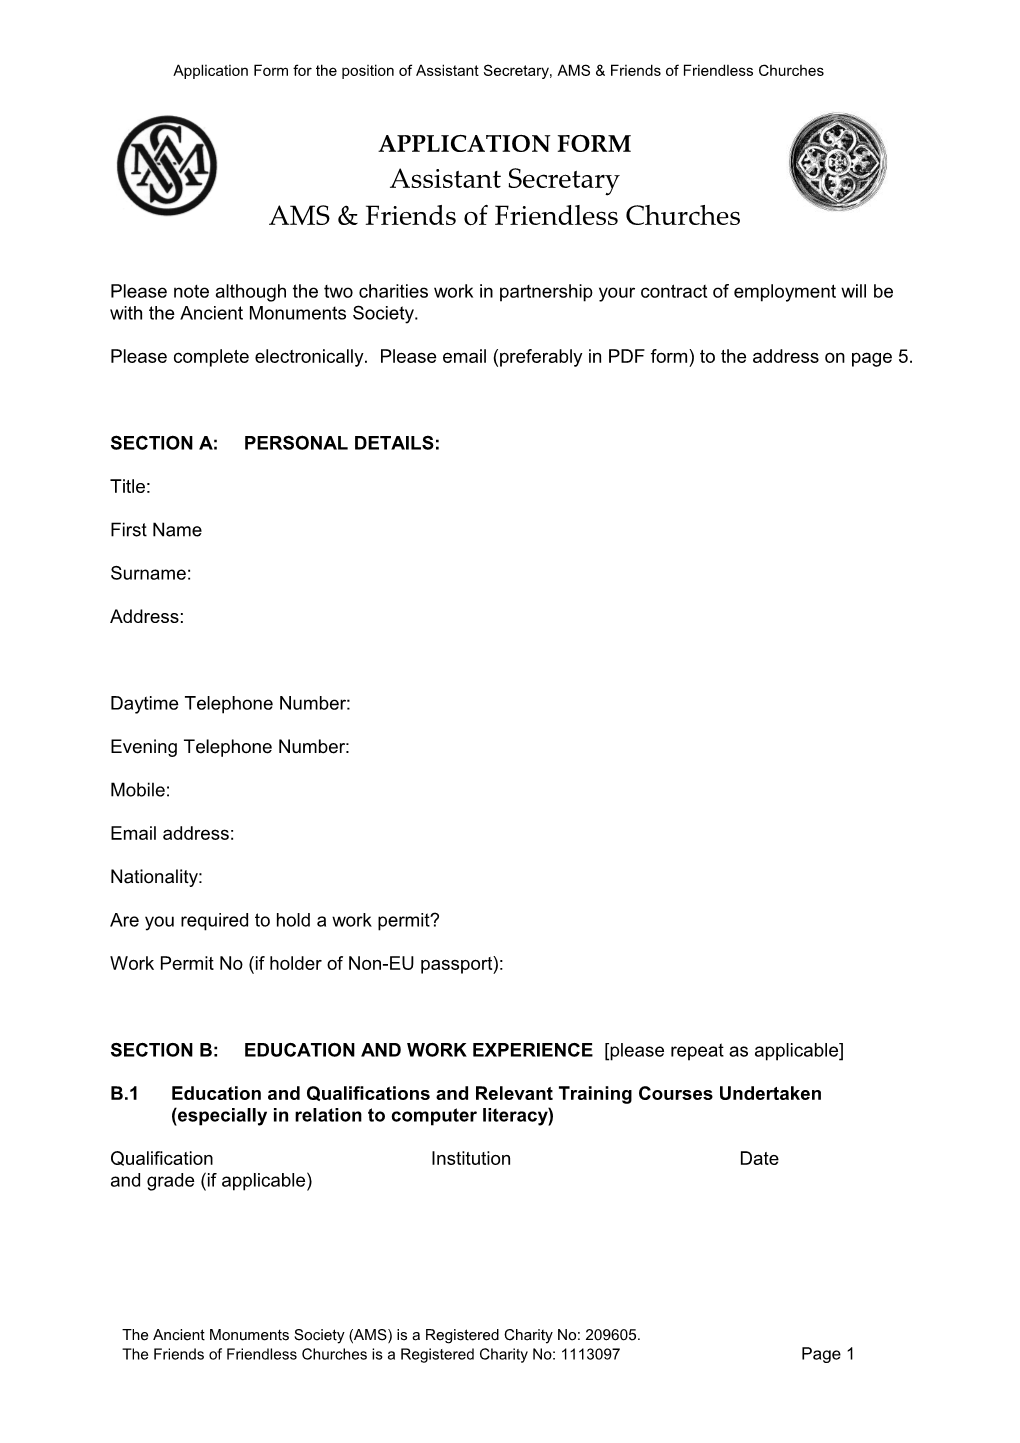 Application Form for the Position of Assistant Secretary, AMS & Friends of Friendless Churches